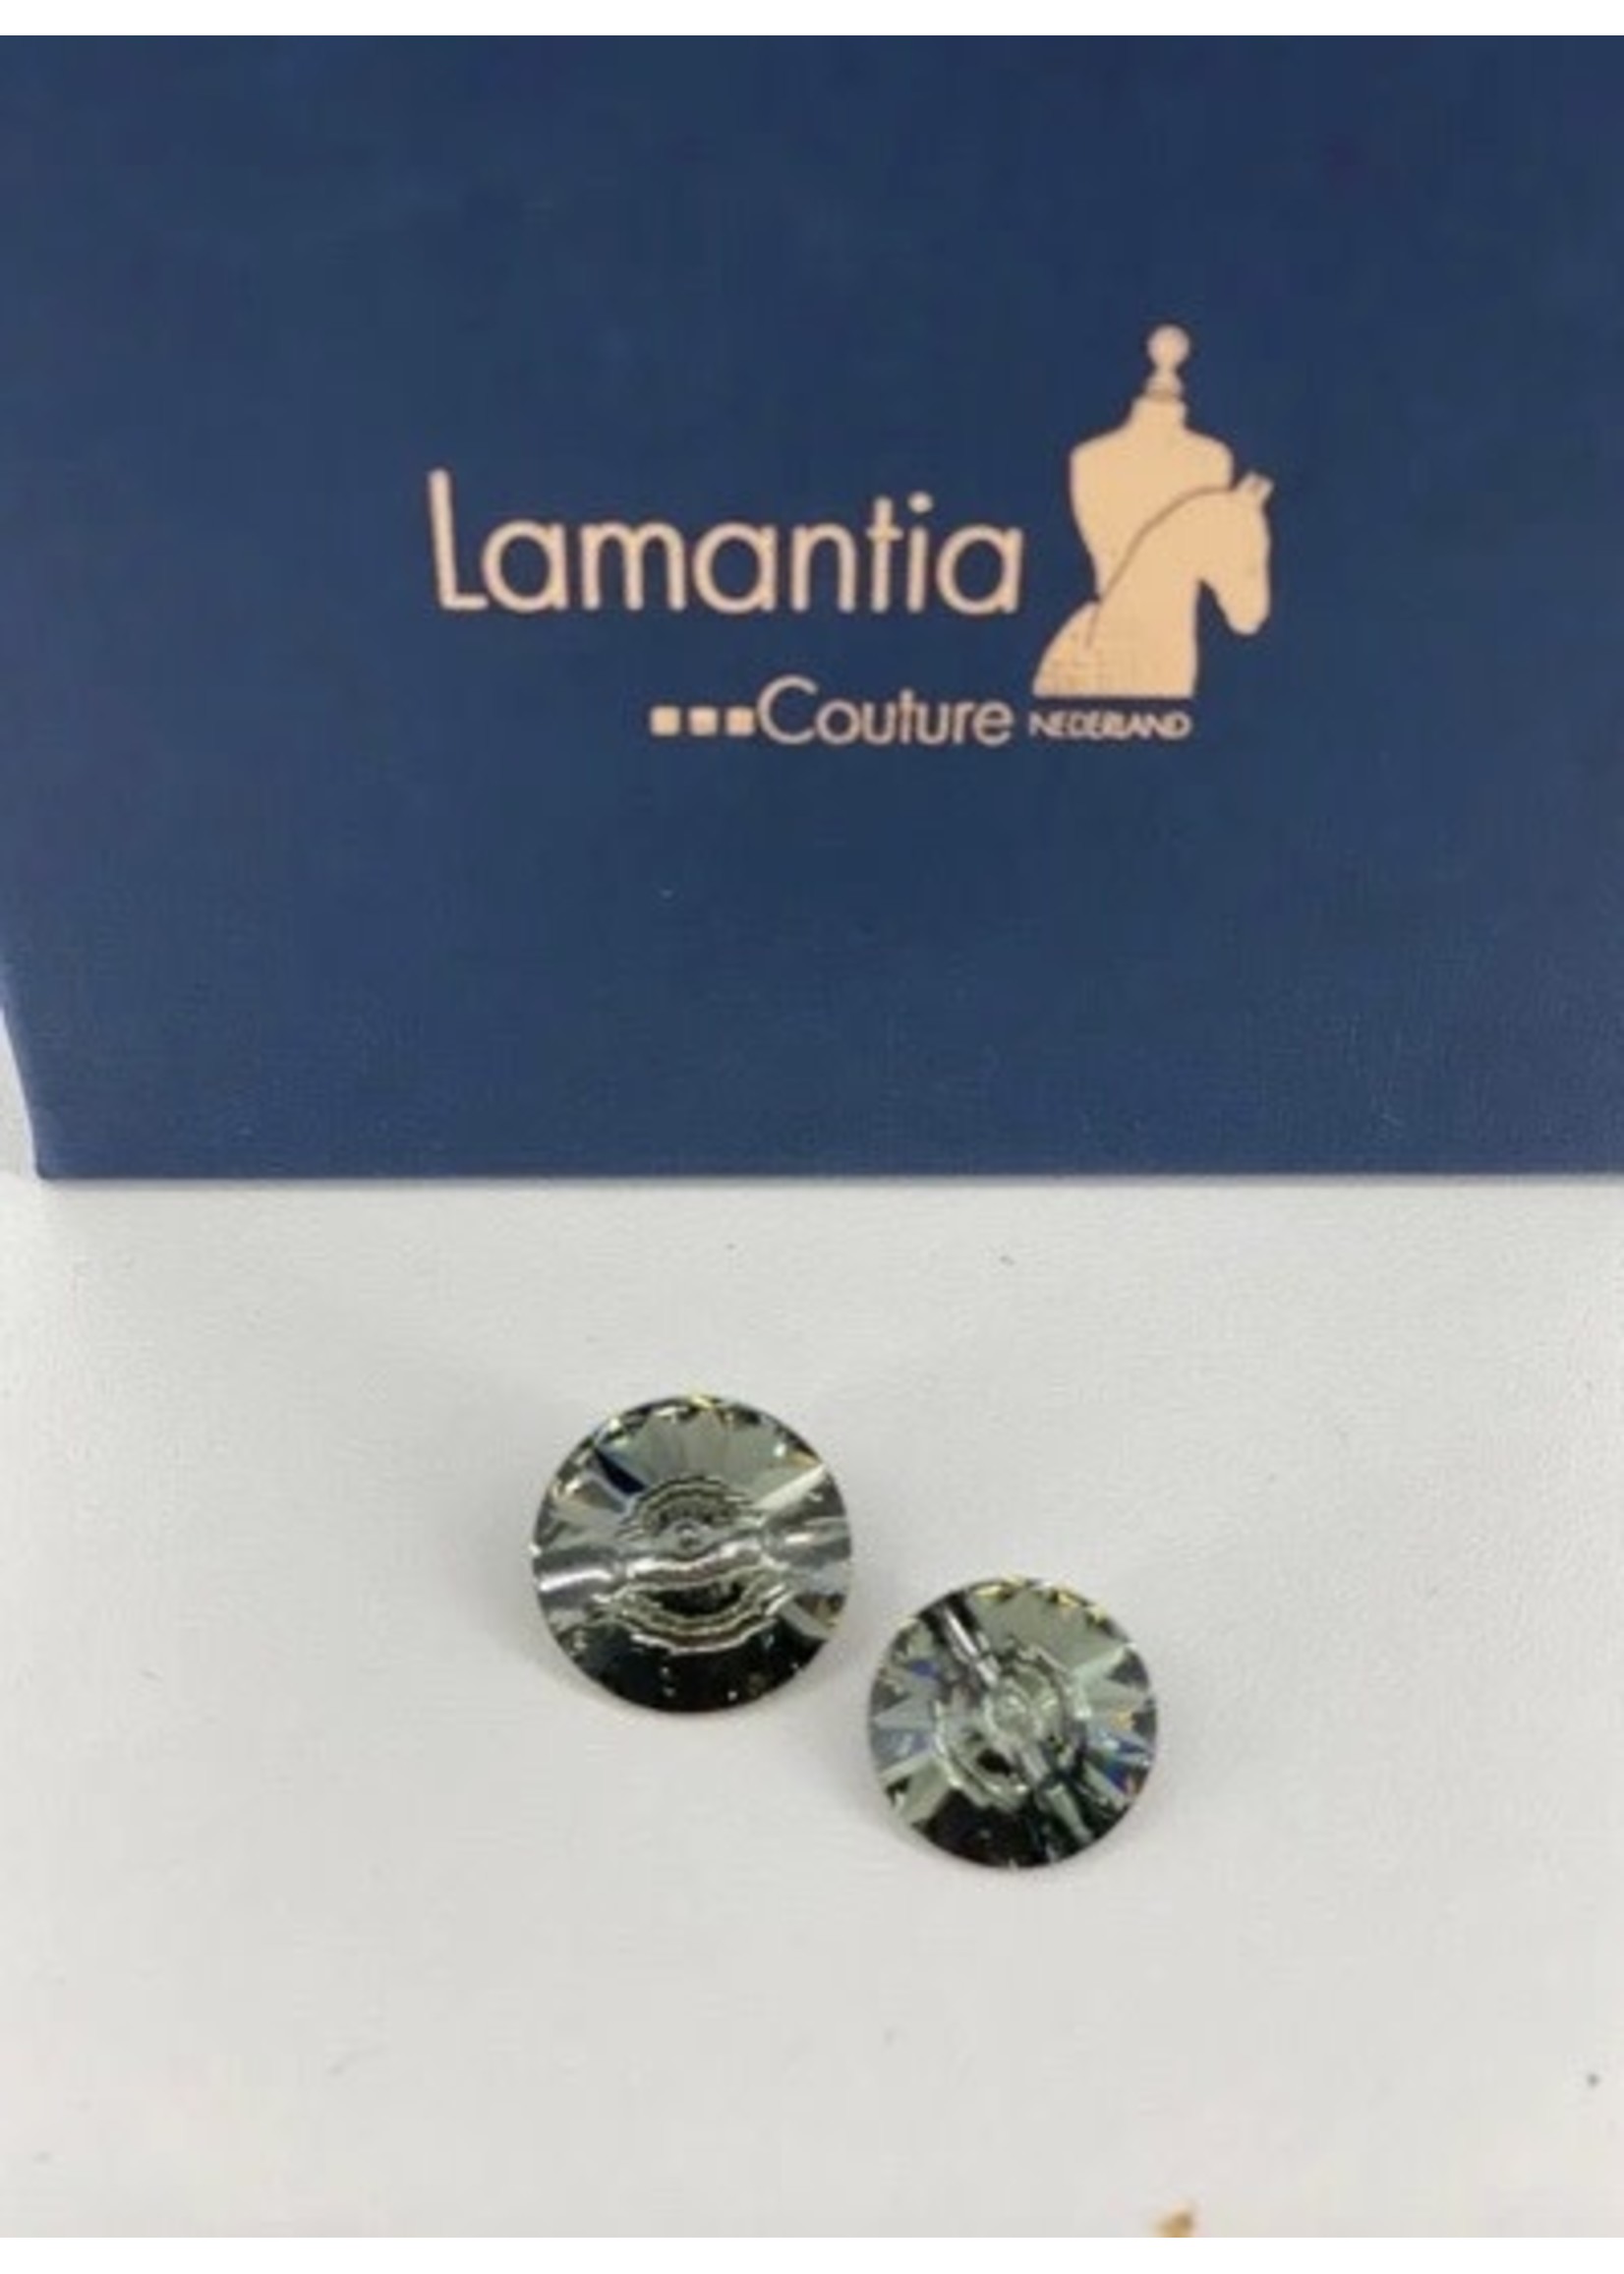 Lamantia Couture Nederland Swarovski button crystal grey big single with back 16mm